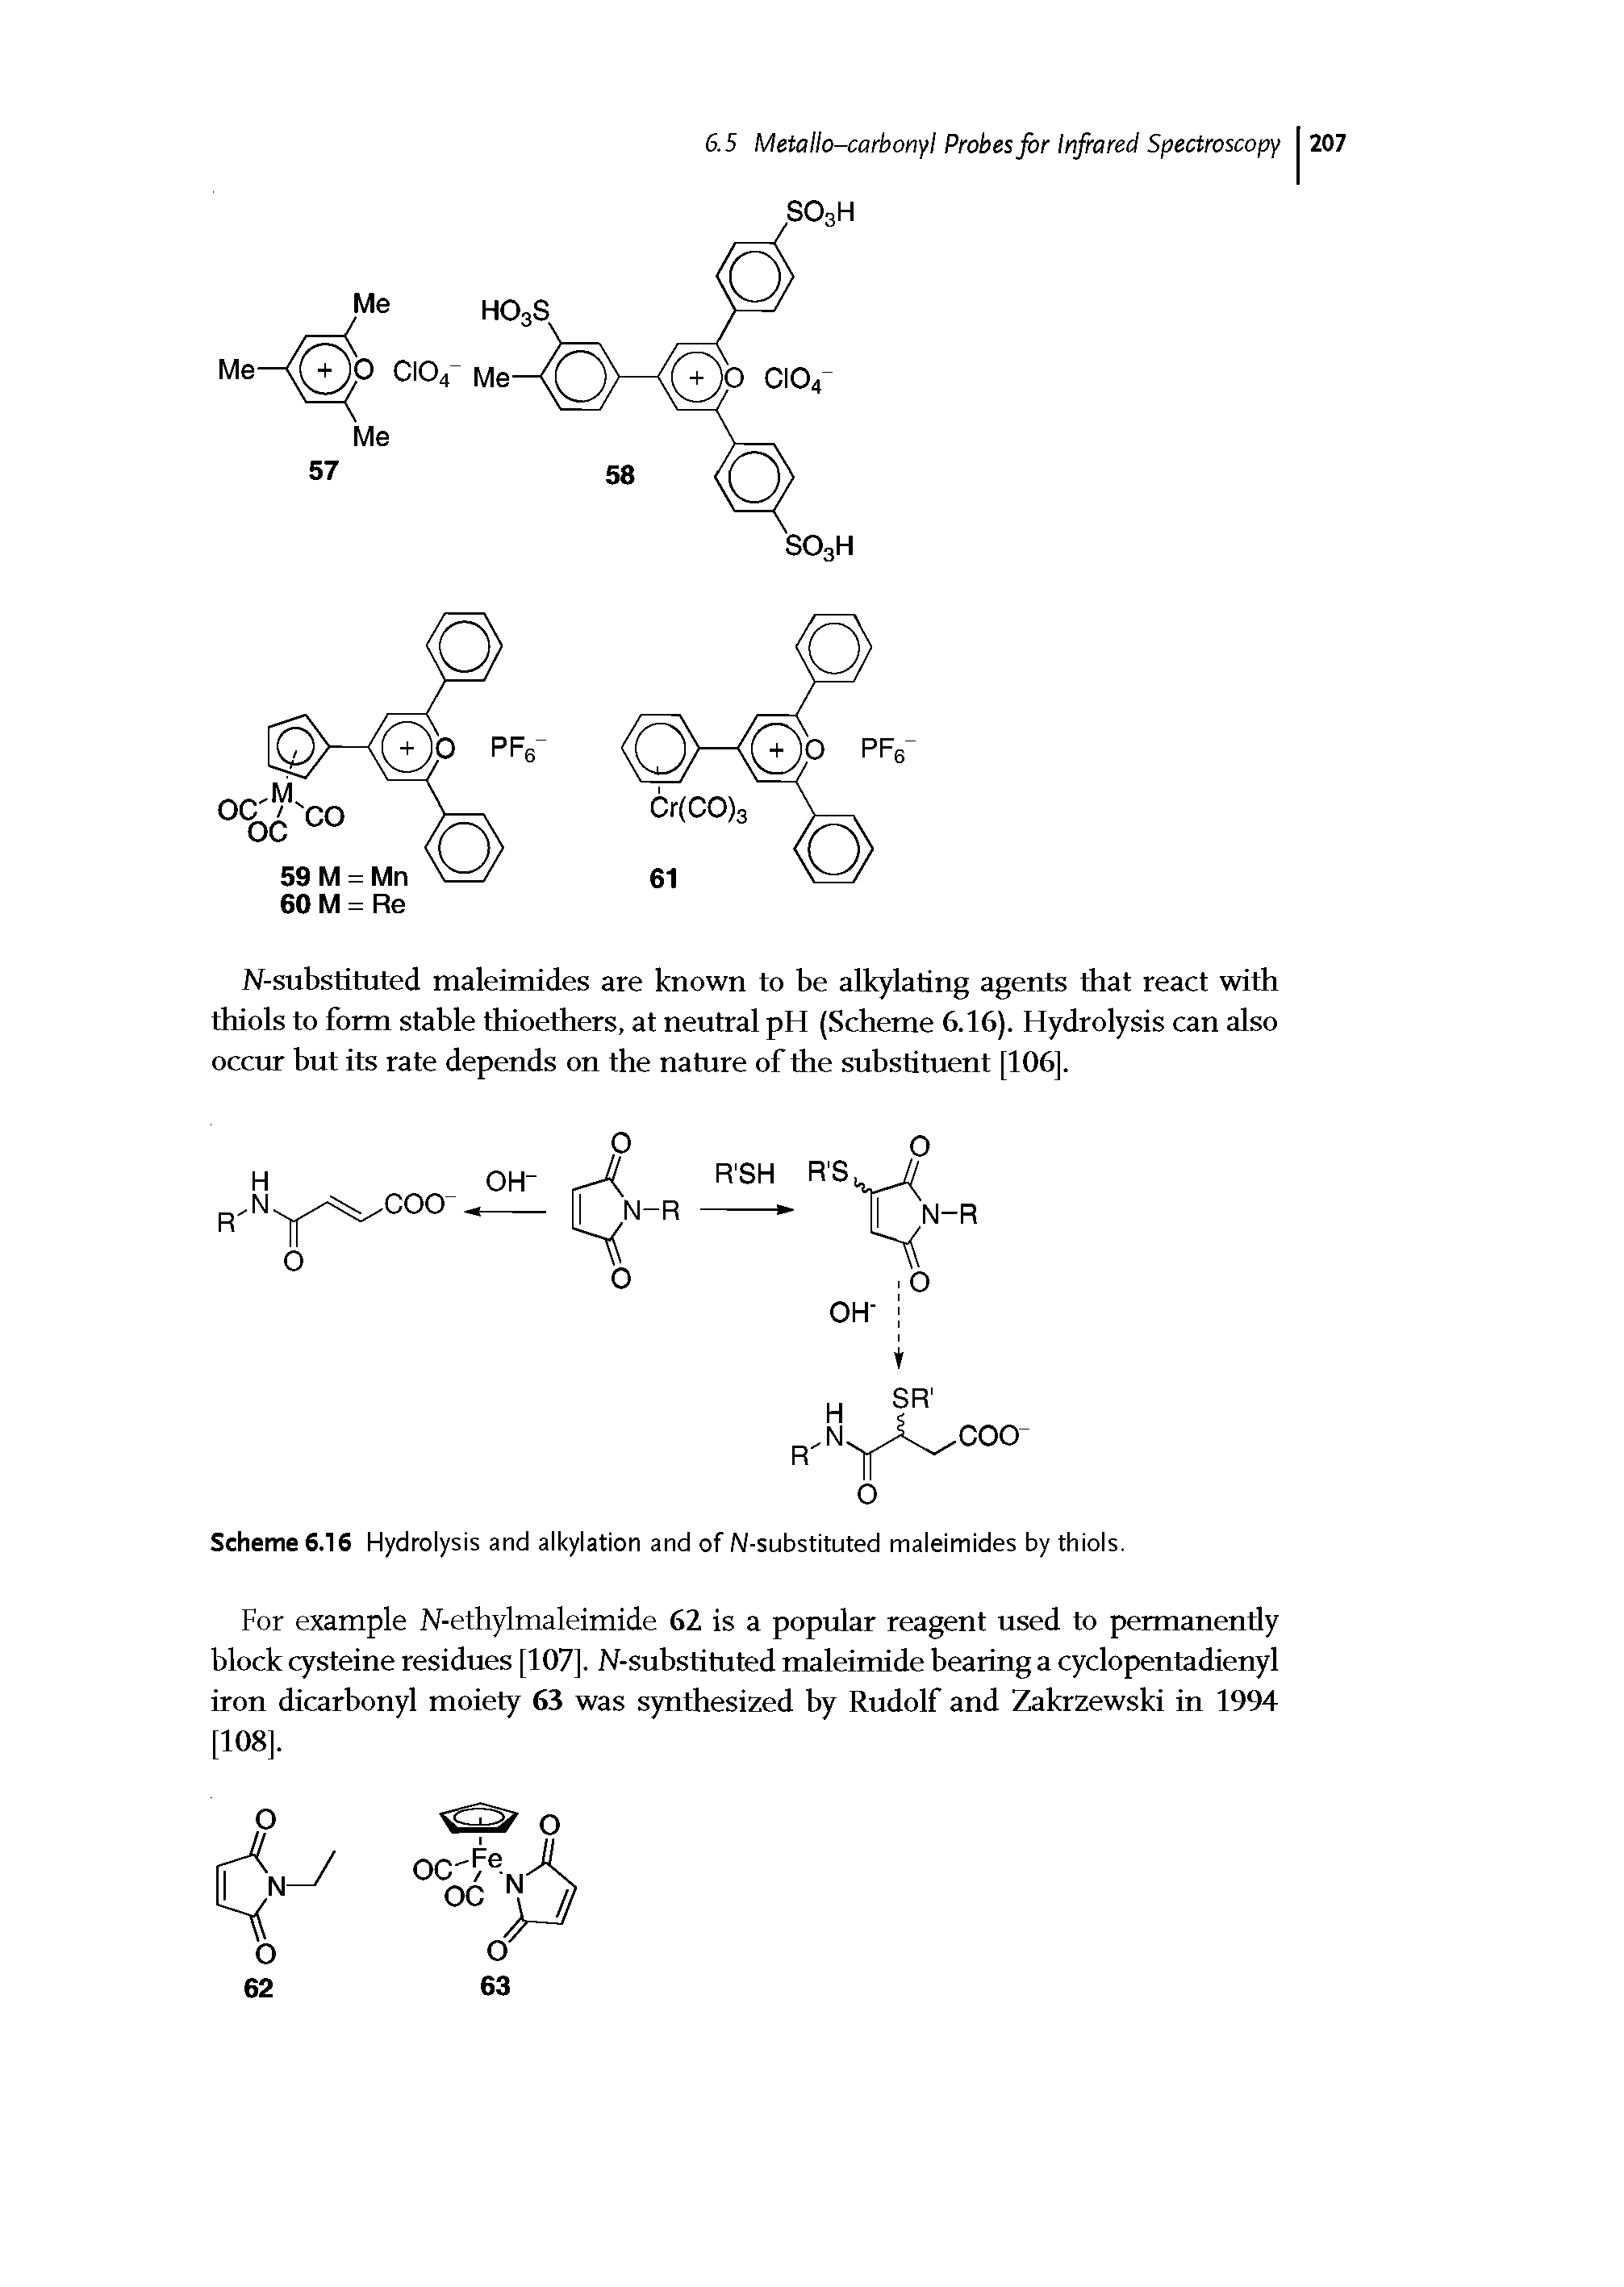 Scheme 6.16 Hydrolysis and alkylation and of N-substituted maleimides by thiols.